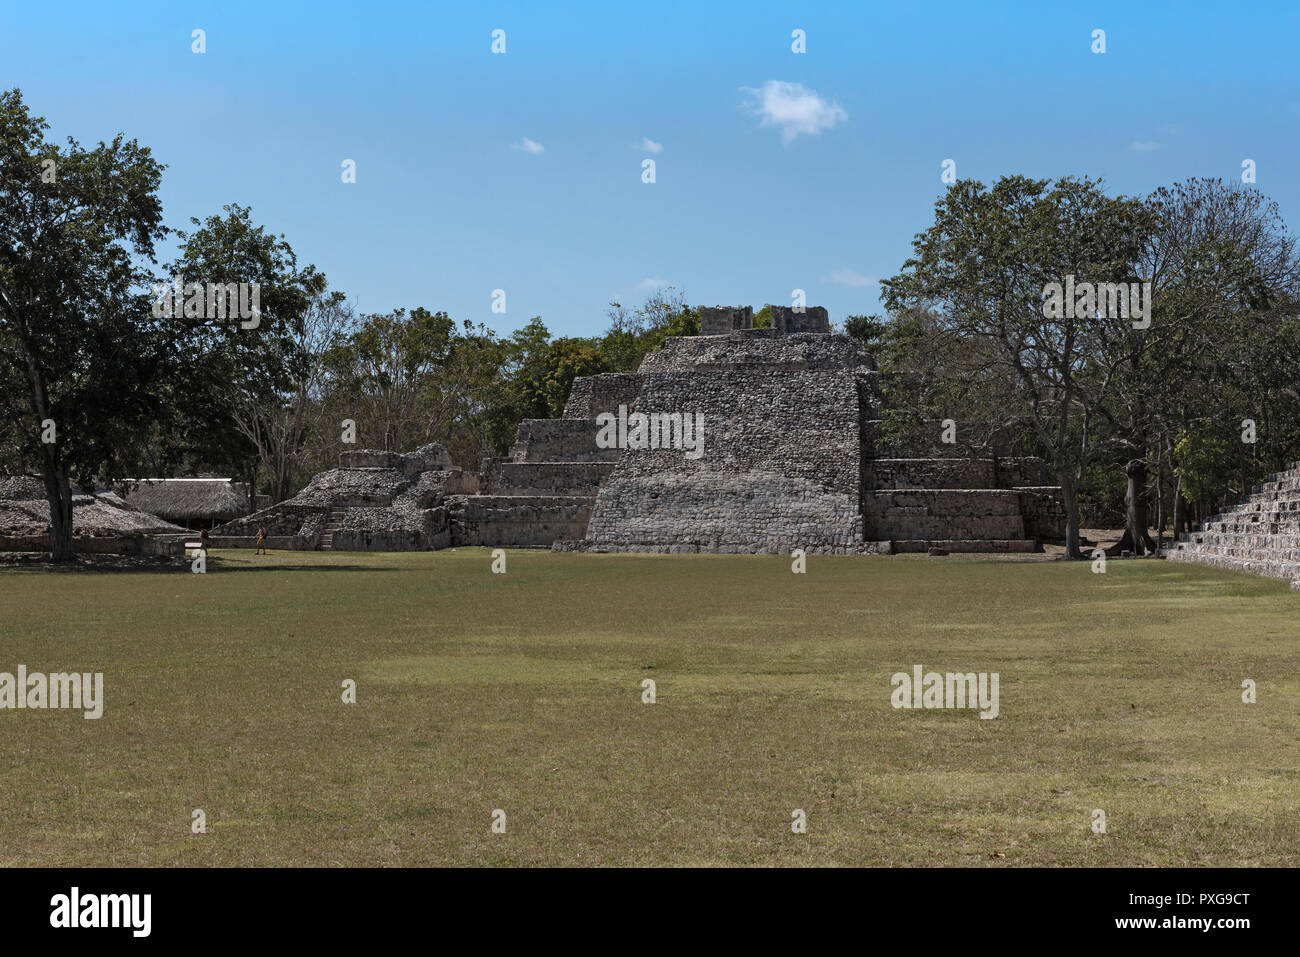 Ruins of the ancient Mayan city of Edzna near campeche, mexico Stock Photo